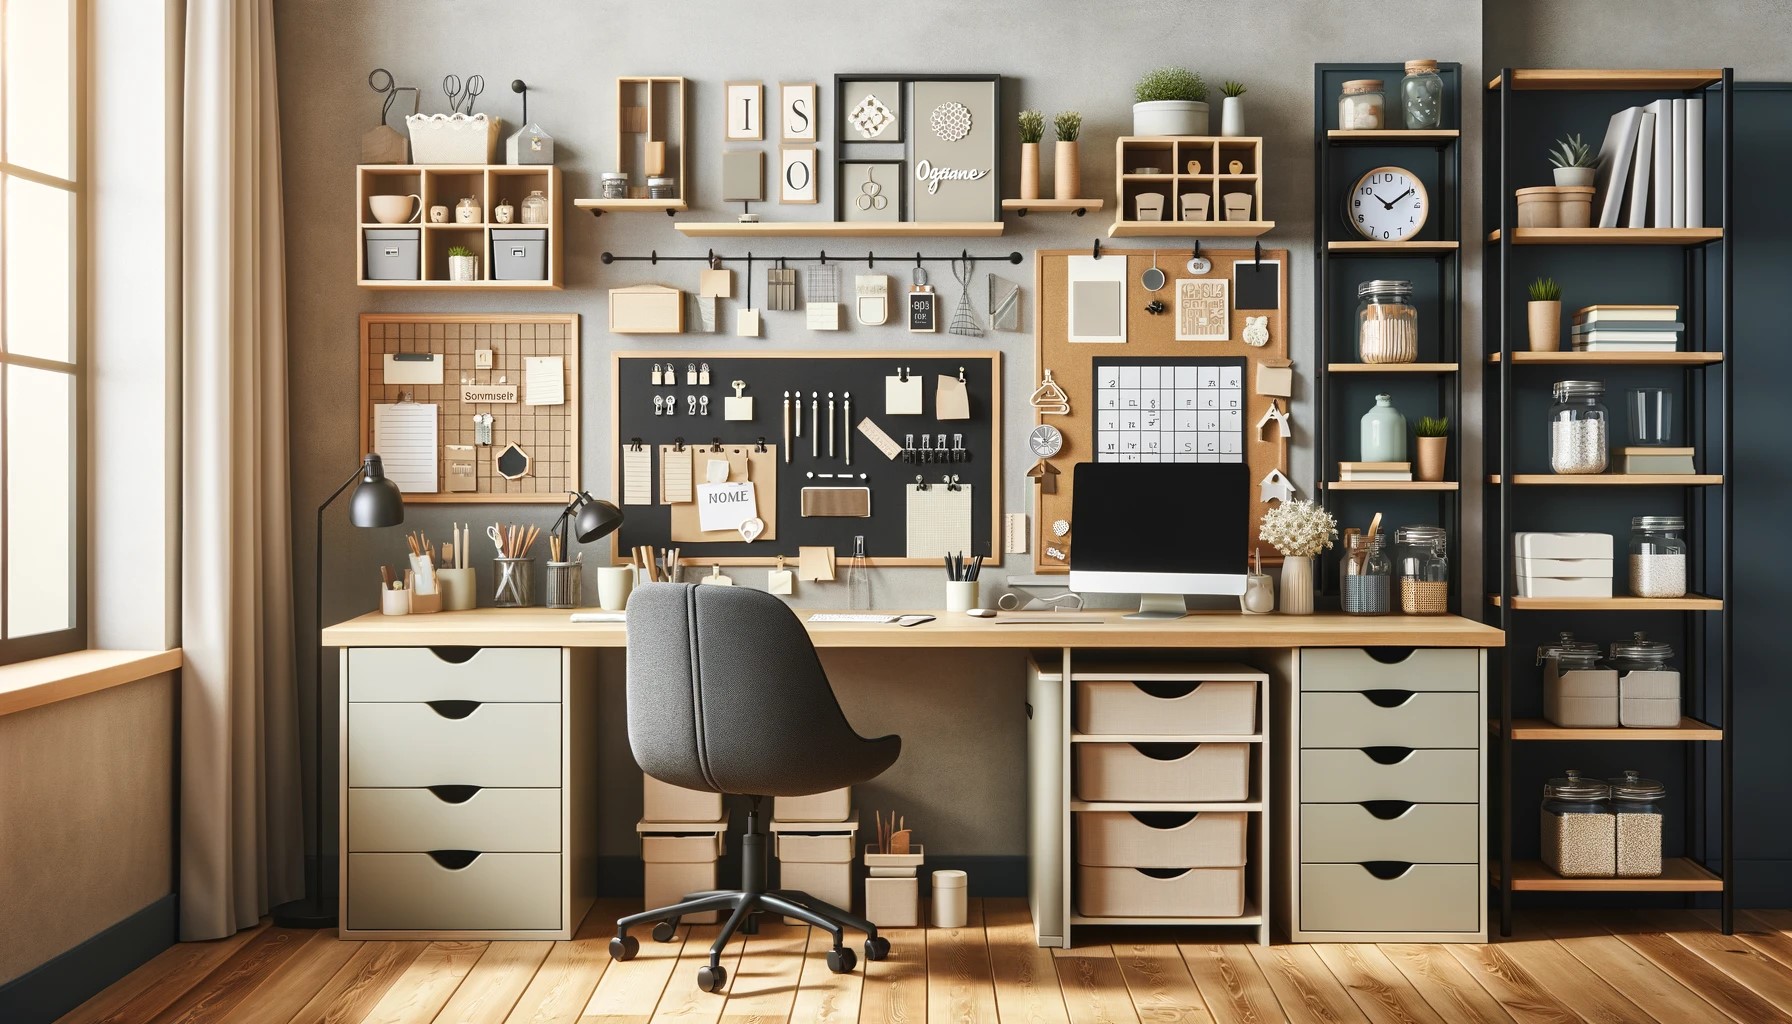 DIY home office, office organization, workspace organization, desk organizers, wall-mounted shelves, magnetic boards, cable management, DIY filing system, floating shelves, repurposed jars, under-desk storage, personalized bulletin boards, ergonomic workspace, home office ideas